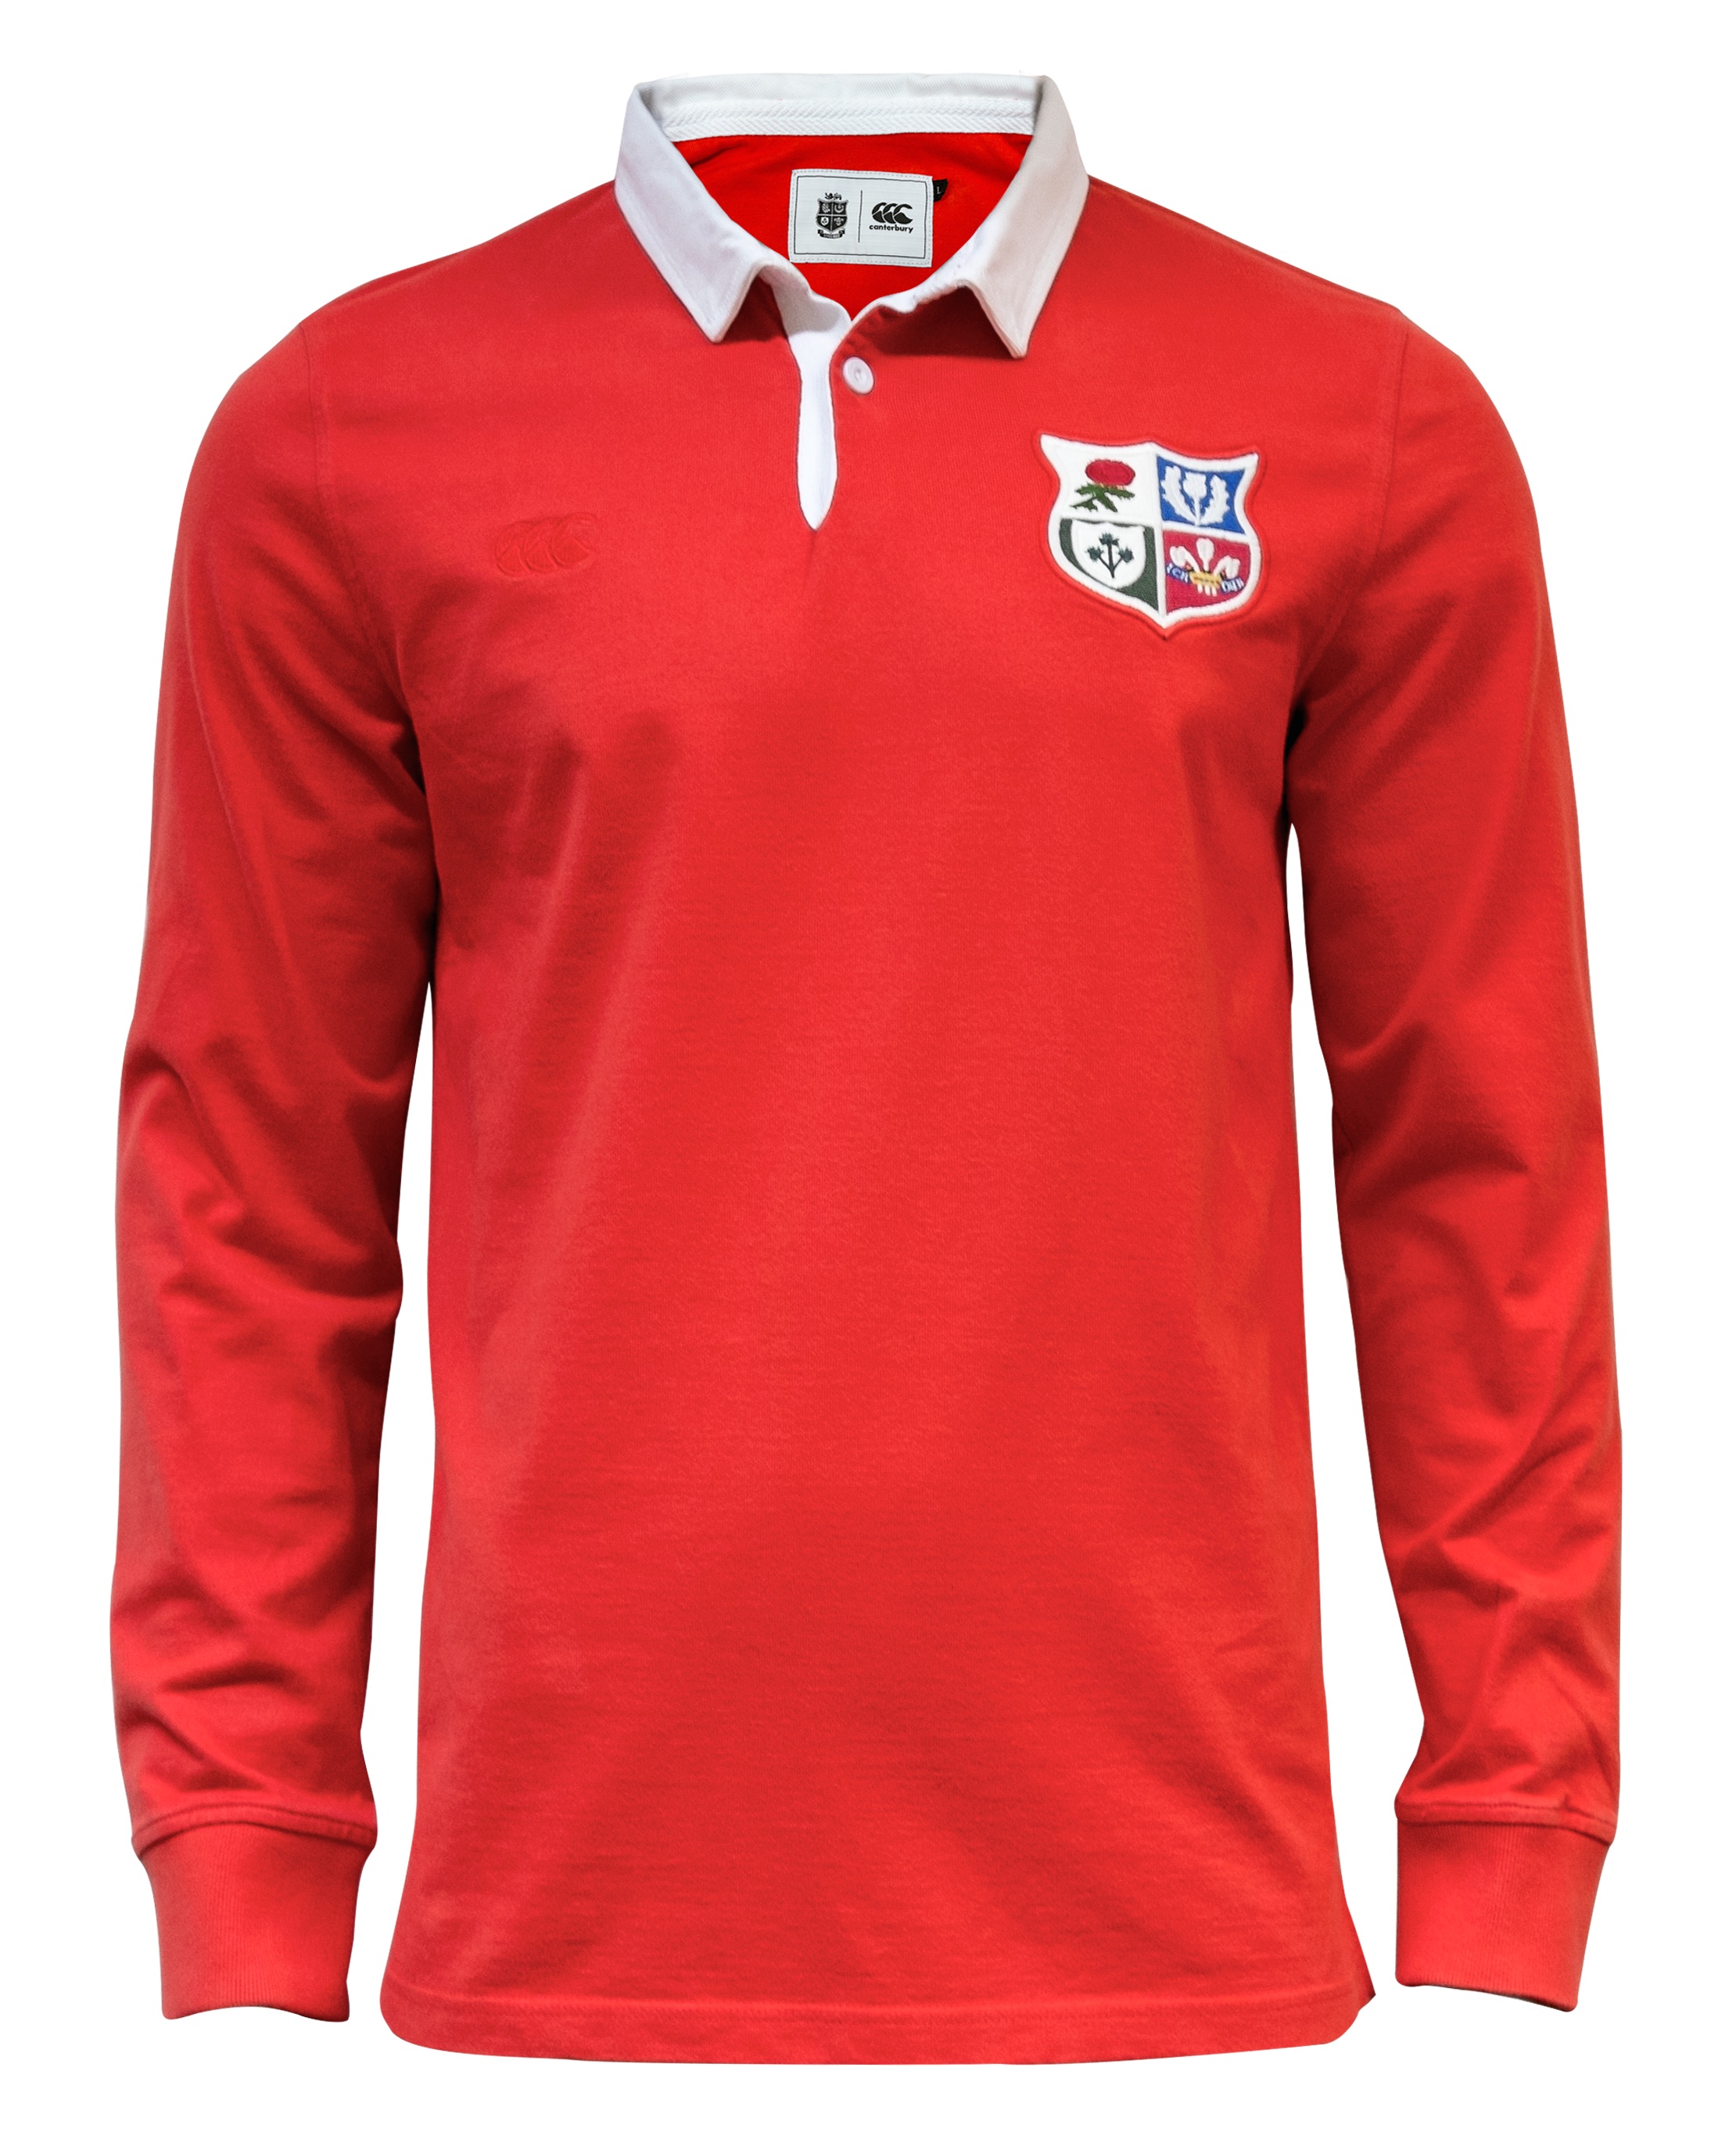 lions rugby t shirt